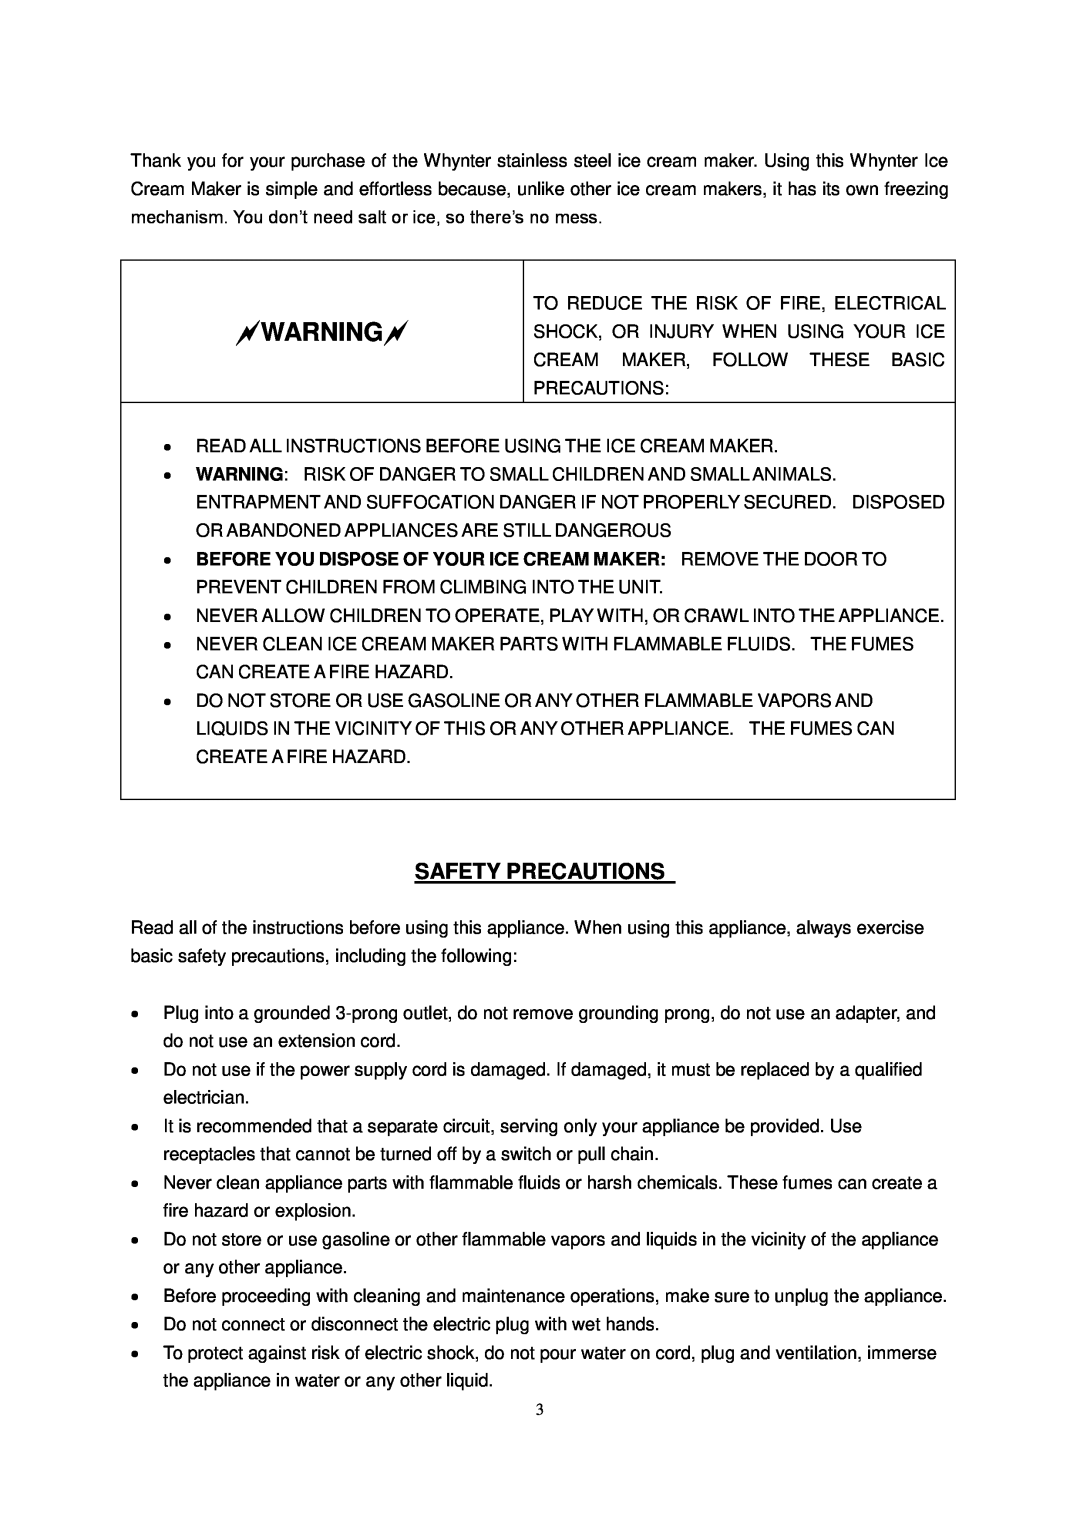 Whynter ICM-15LS instruction manual Warning, Safety Precautions 